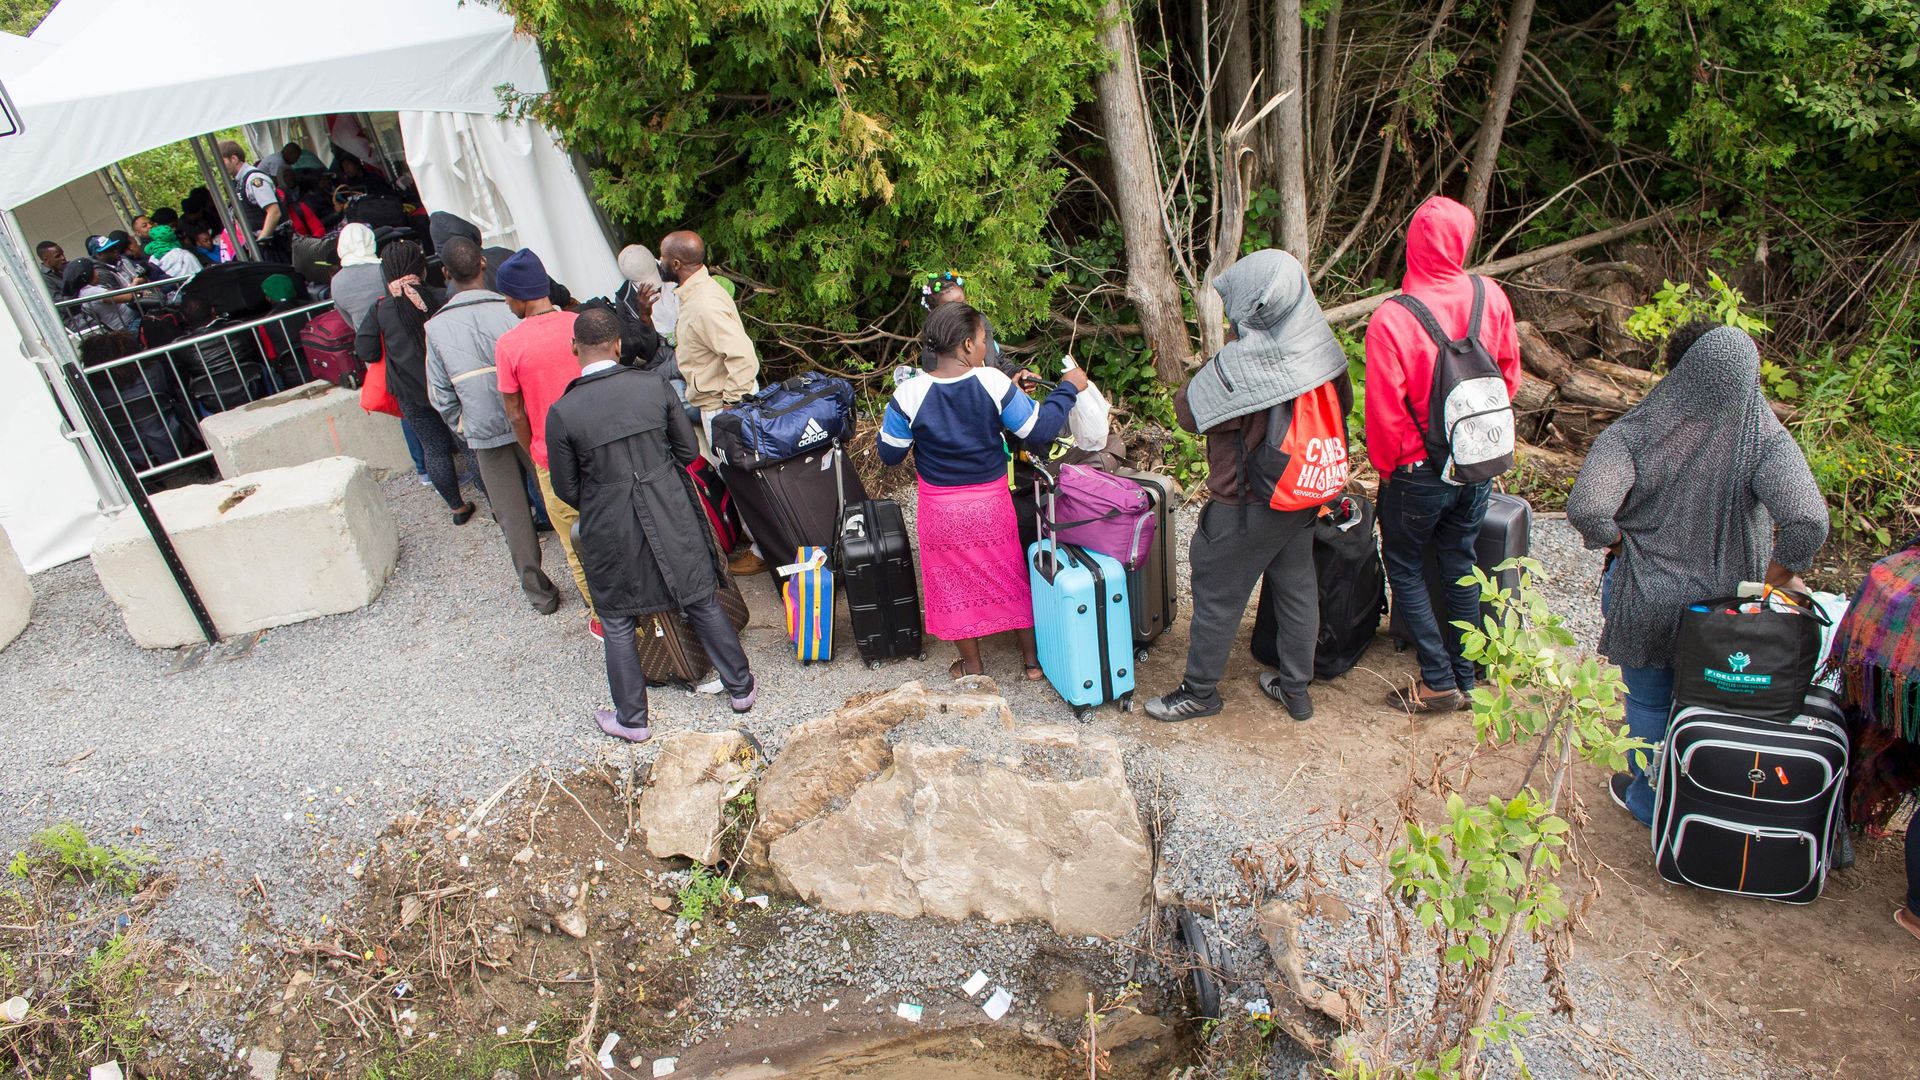 A long line of asylum seekers wait to illegally cross the Canada/US border near Champlain, New York